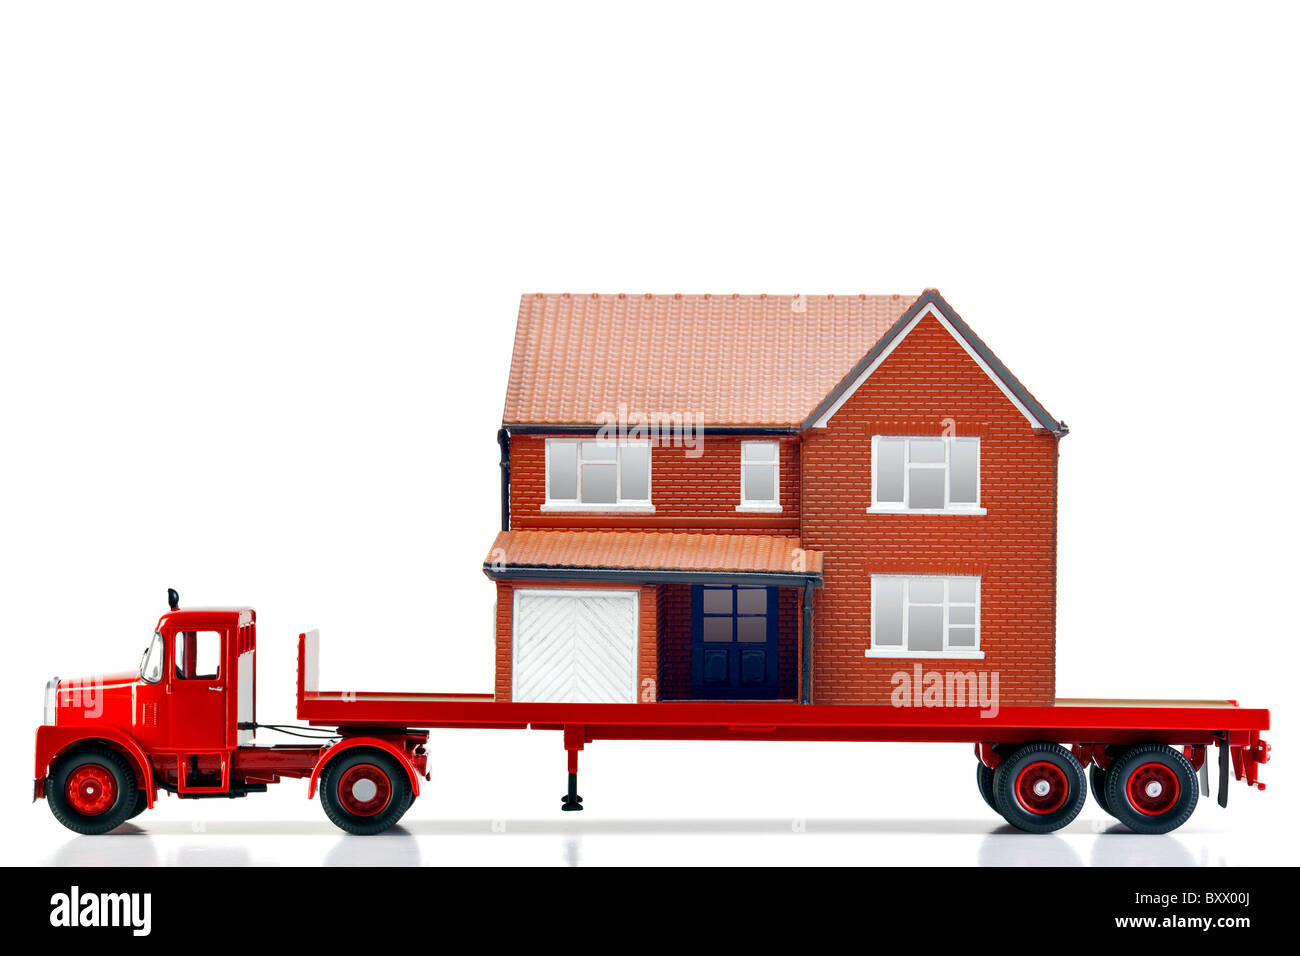 A flatbed articulated lorry loaded with a house isolated on a white background. Both are models. Stock Photo